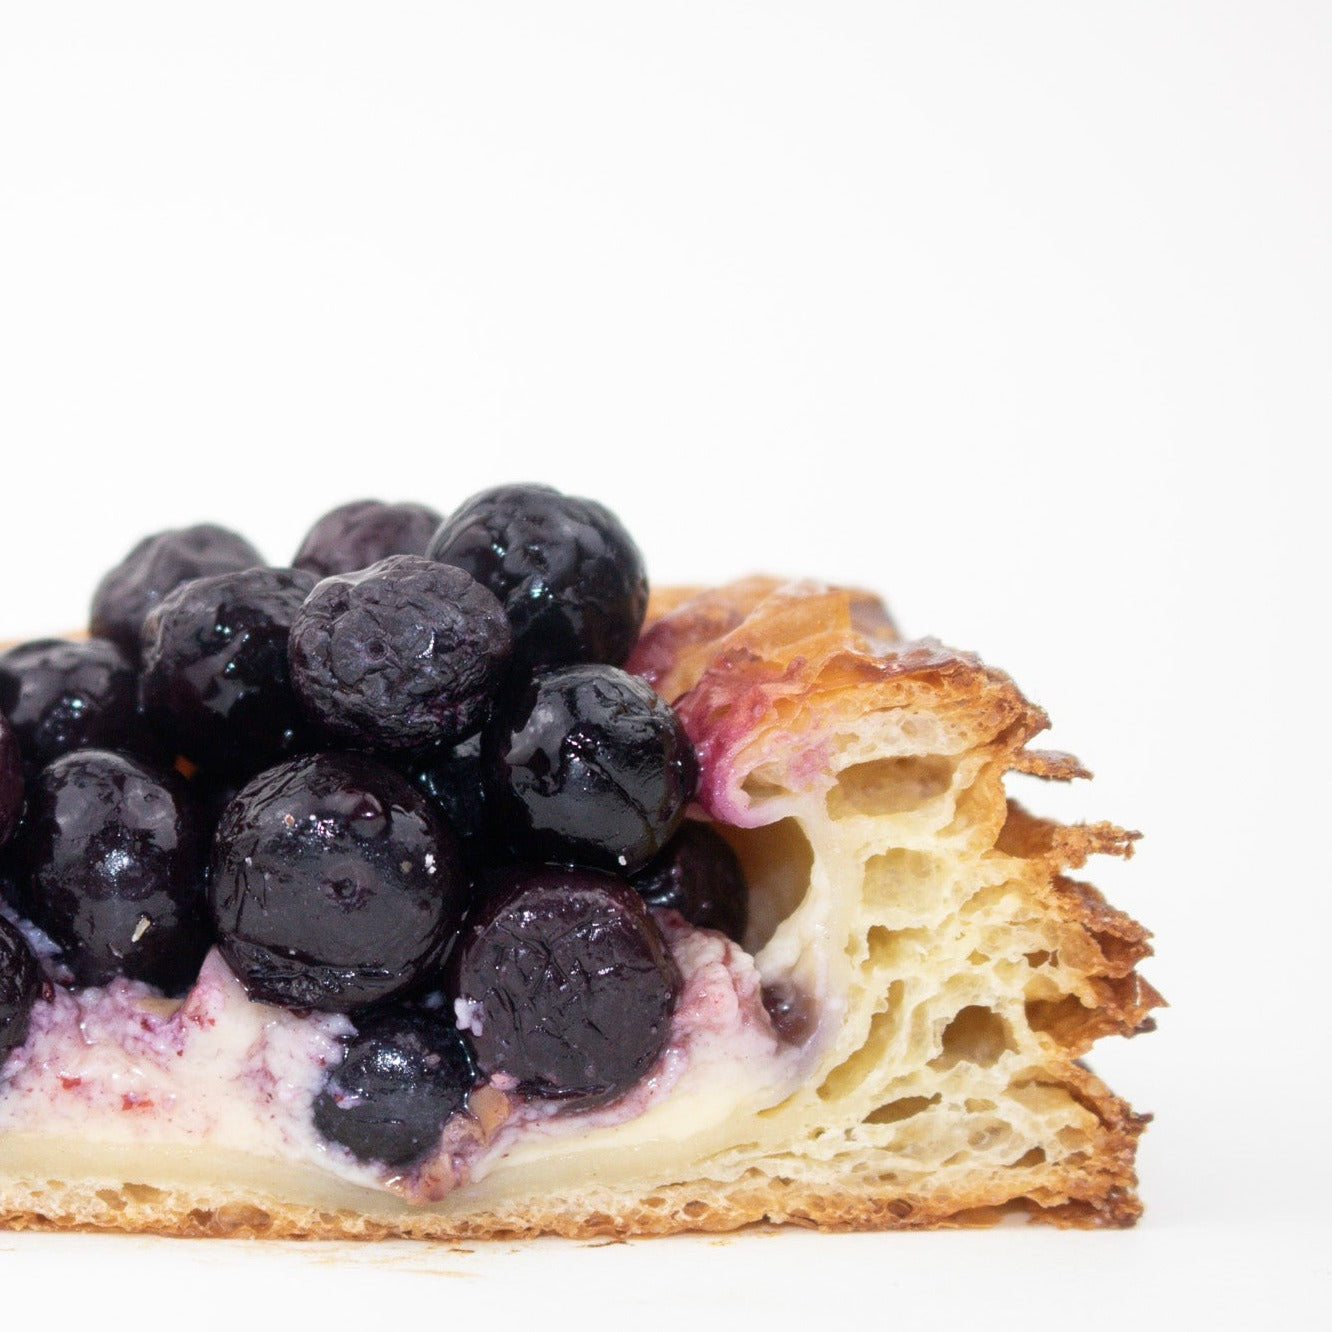 close up image of blueberry danish. shows blueberries, custard and inside of pastry 